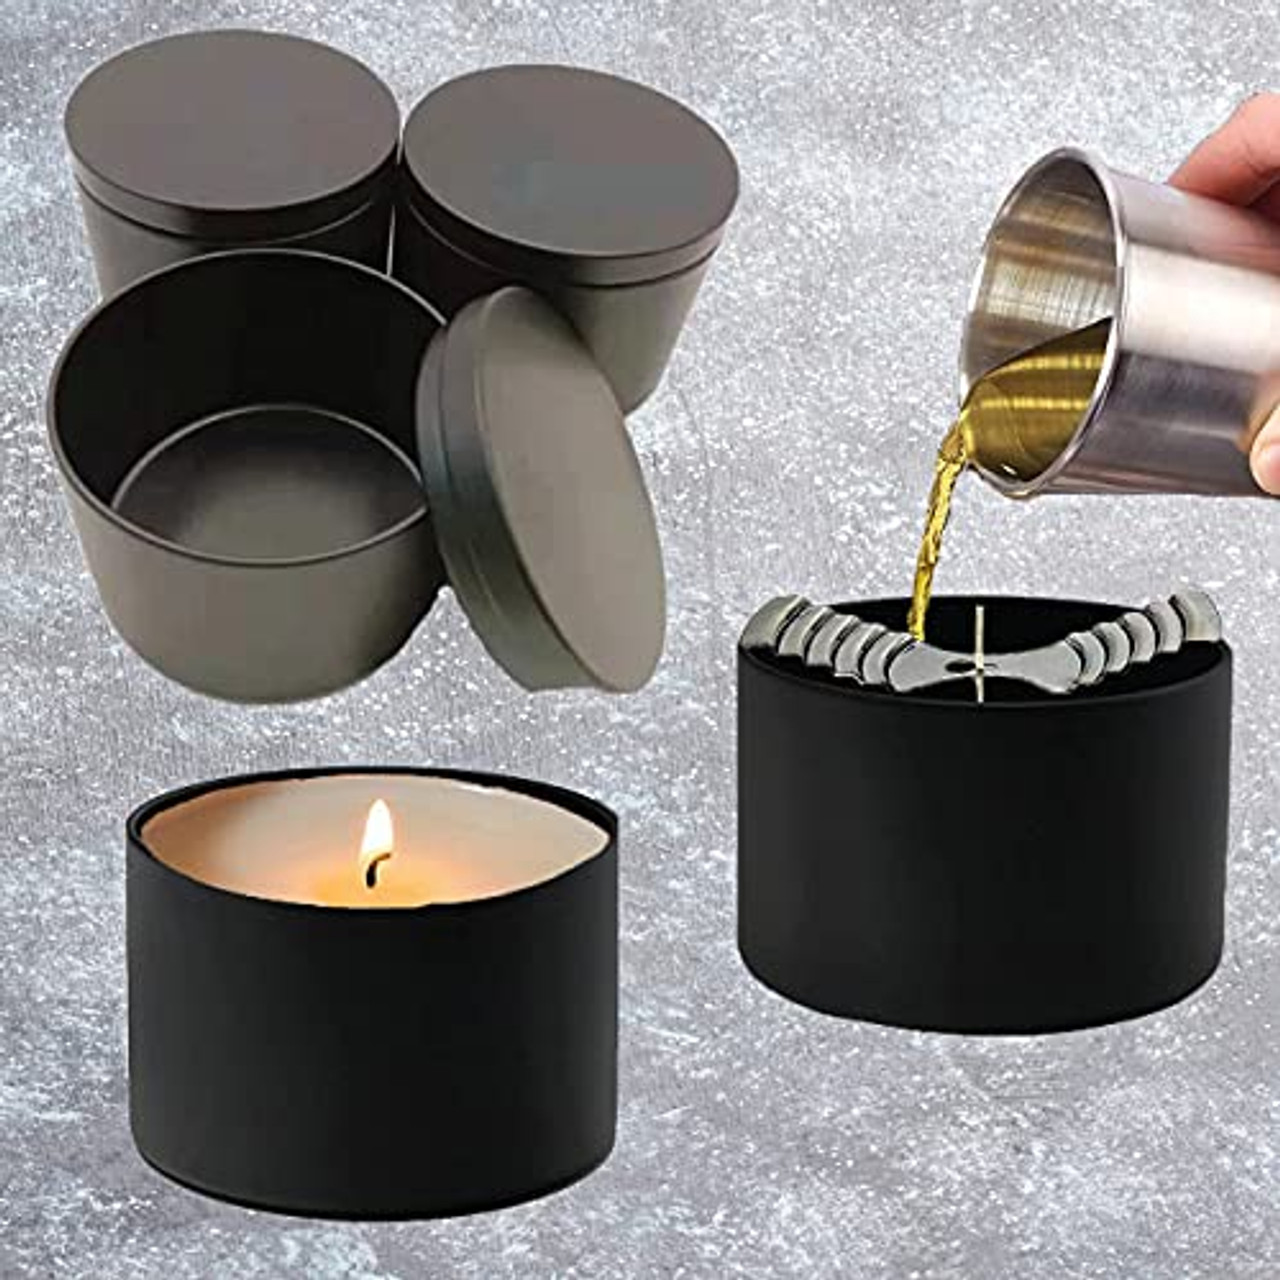 LEXONIX 24pcs All Black 8oz Candle Tins Candle Making Supplies Candle tin  Set Candle containers Empty Candle Jars, Edgeless Cylinder Design Candle